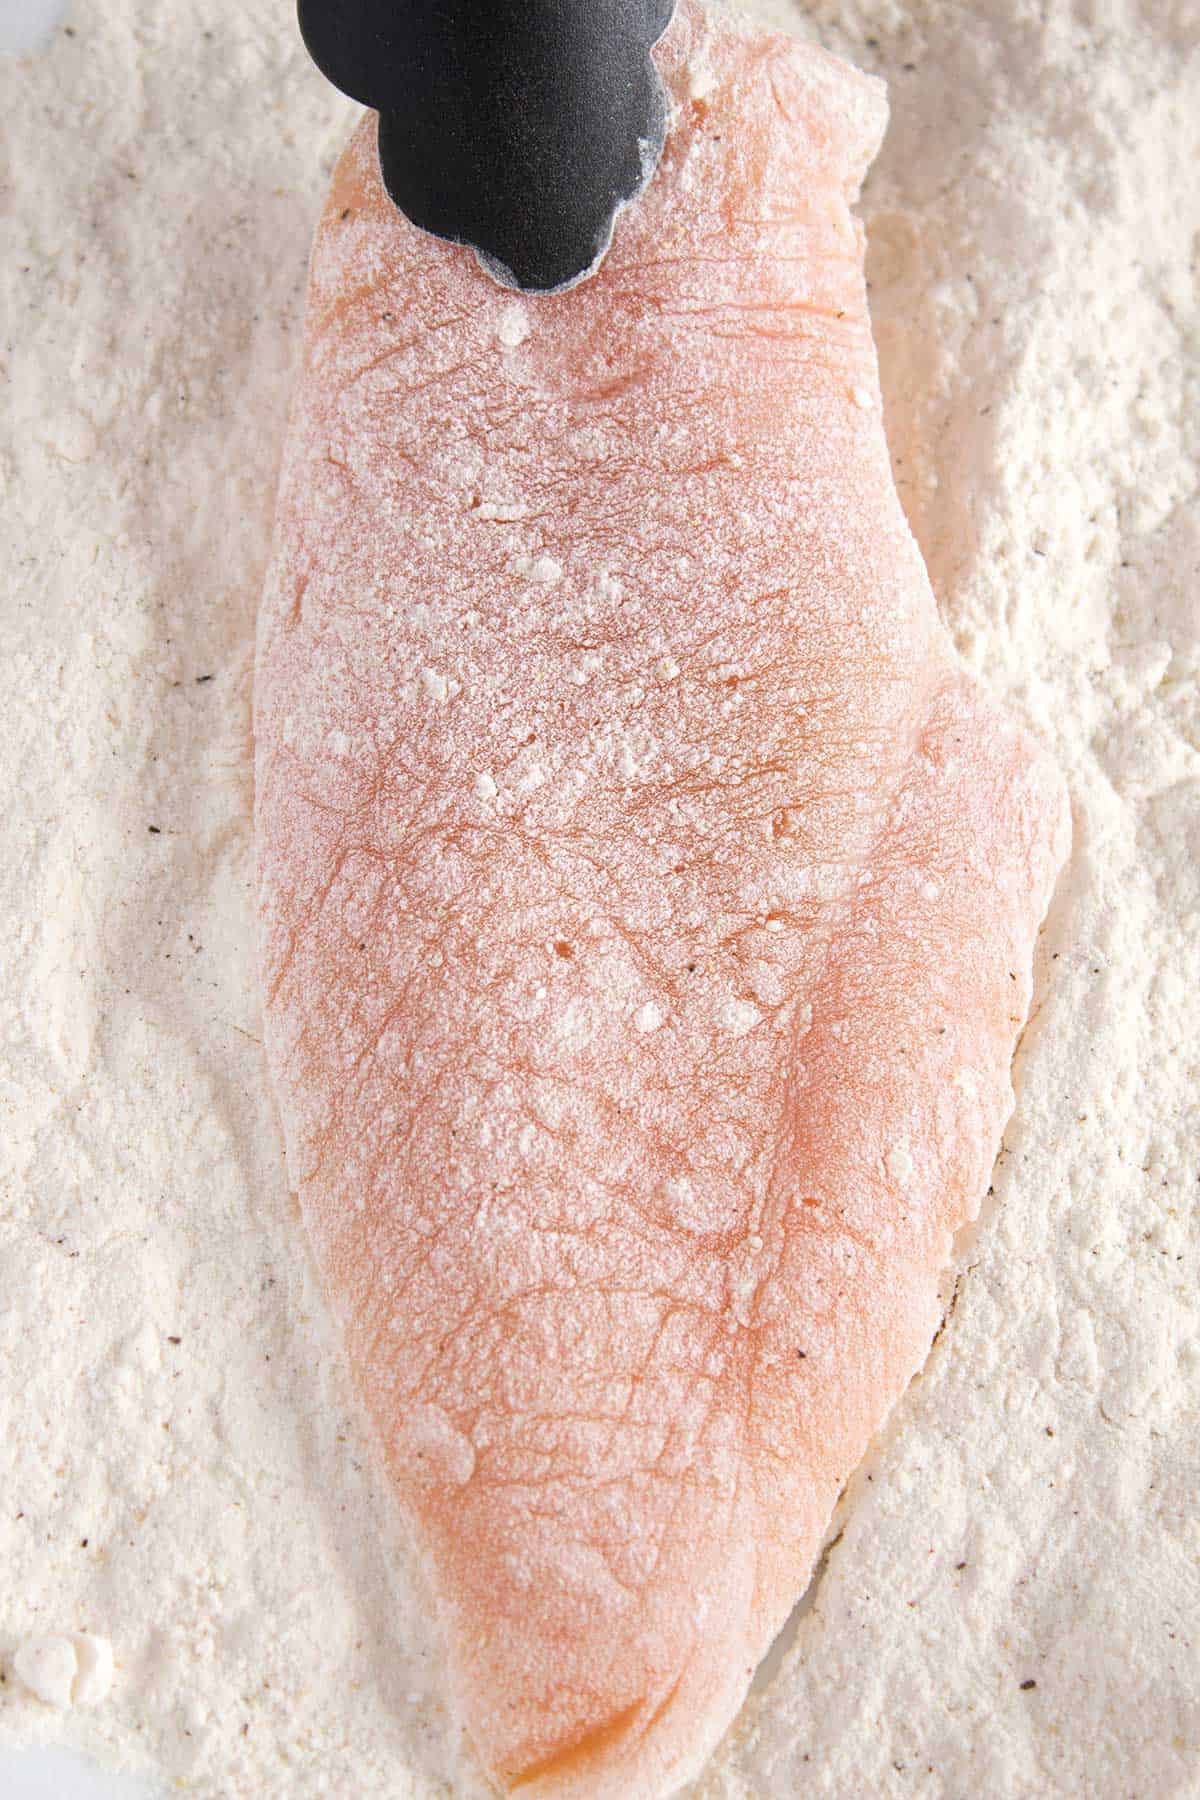 Raw chicken breast coated in a light layer of flour and sitting in a pile of more flour.